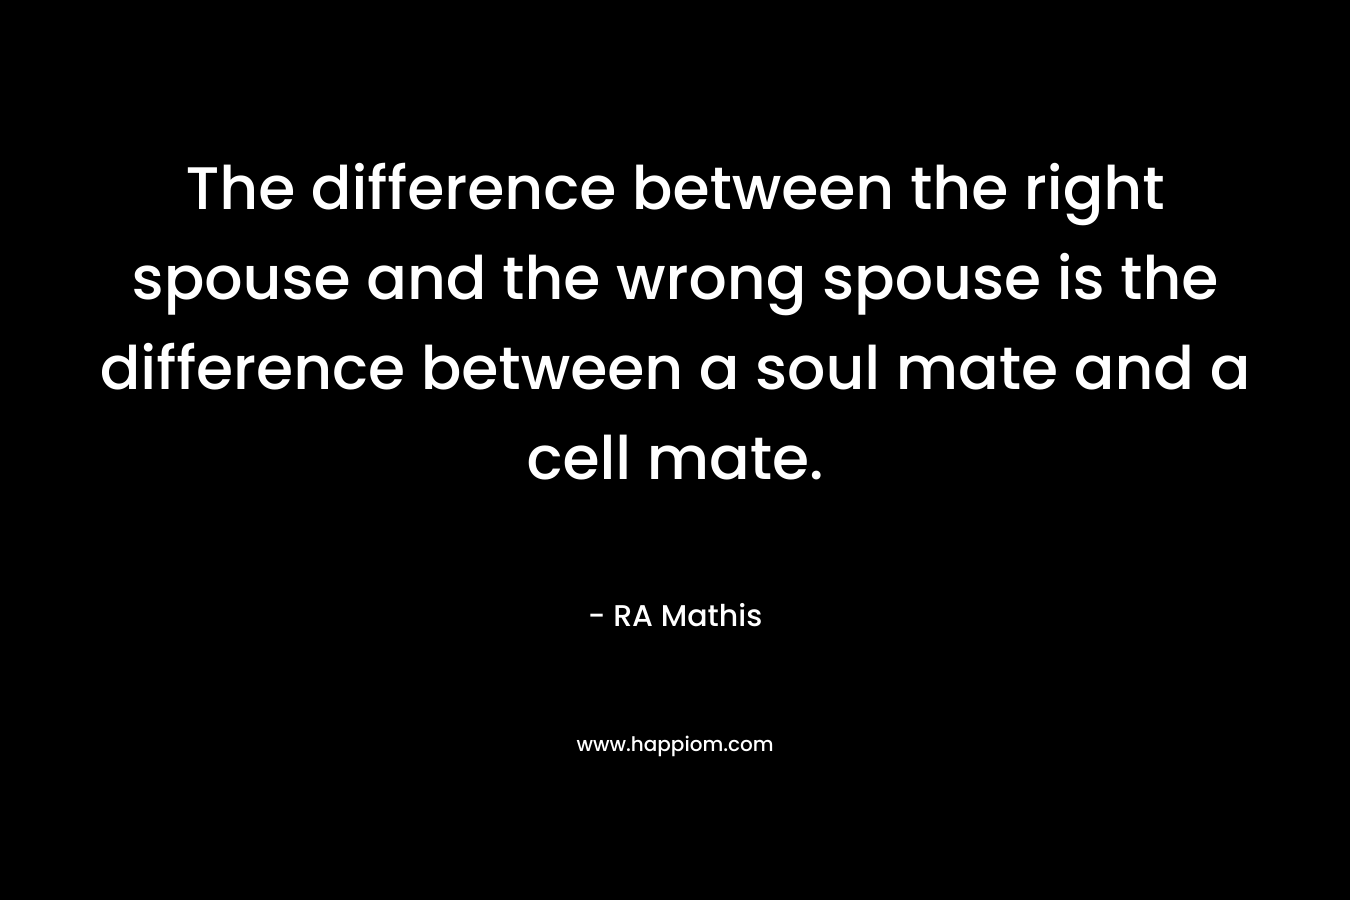 The difference between the right spouse and the wrong spouse is the difference between a soul mate and a cell mate.